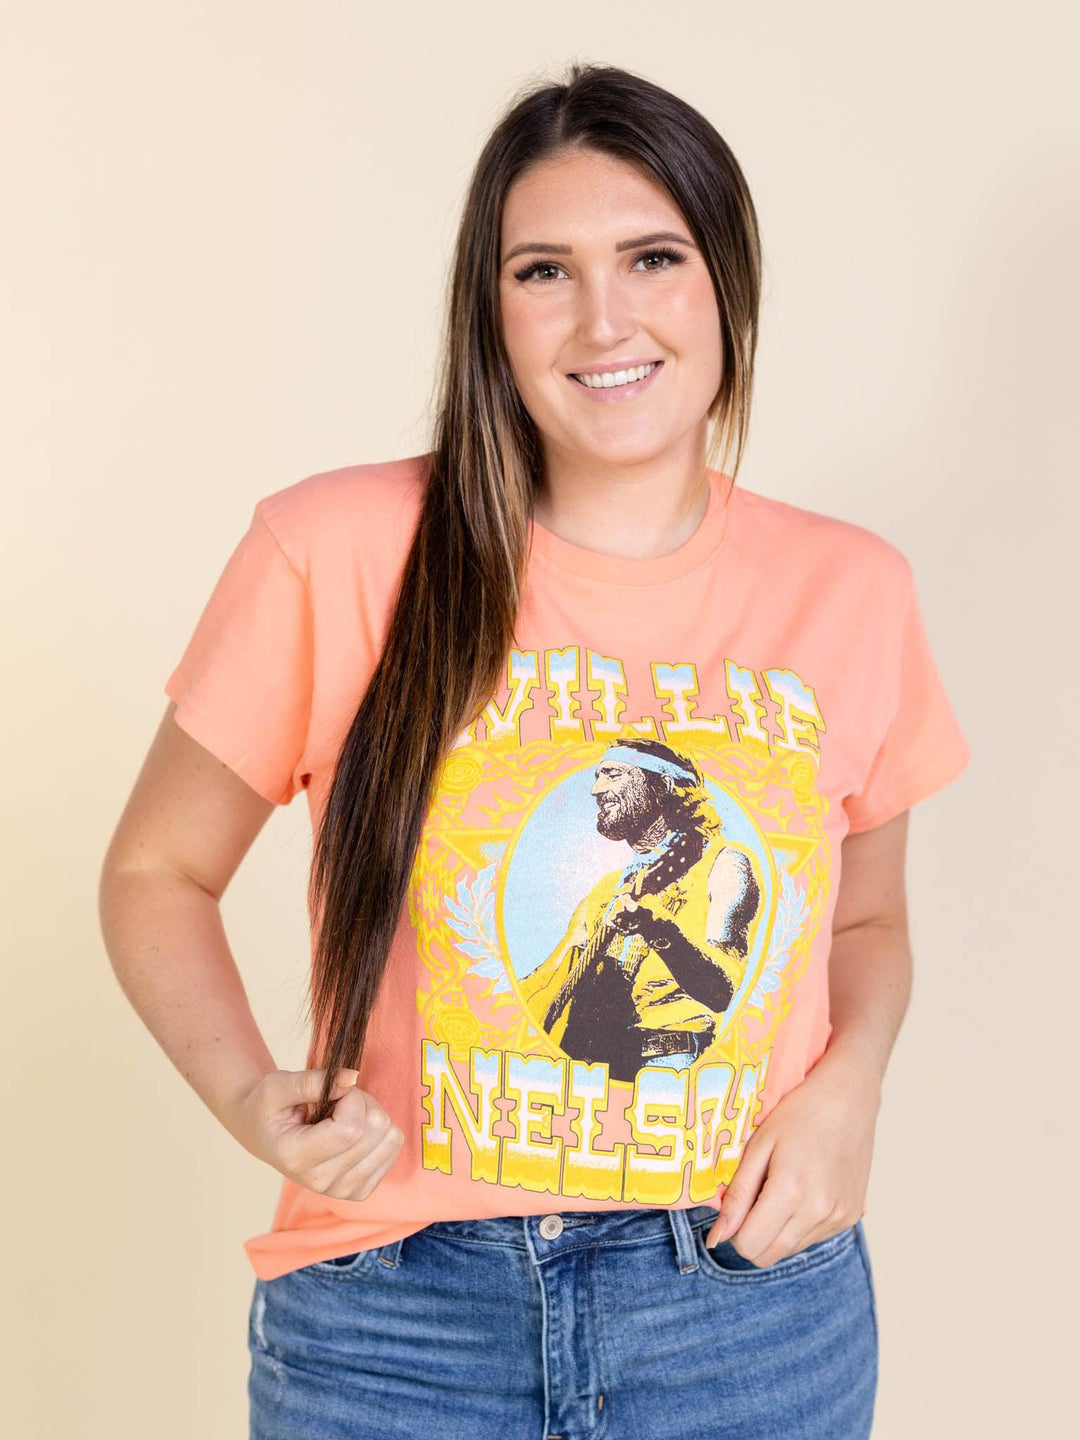 Daydreamer-Daydreamer Willie Nelson Outlaw Country Tee - Leela and Lavender